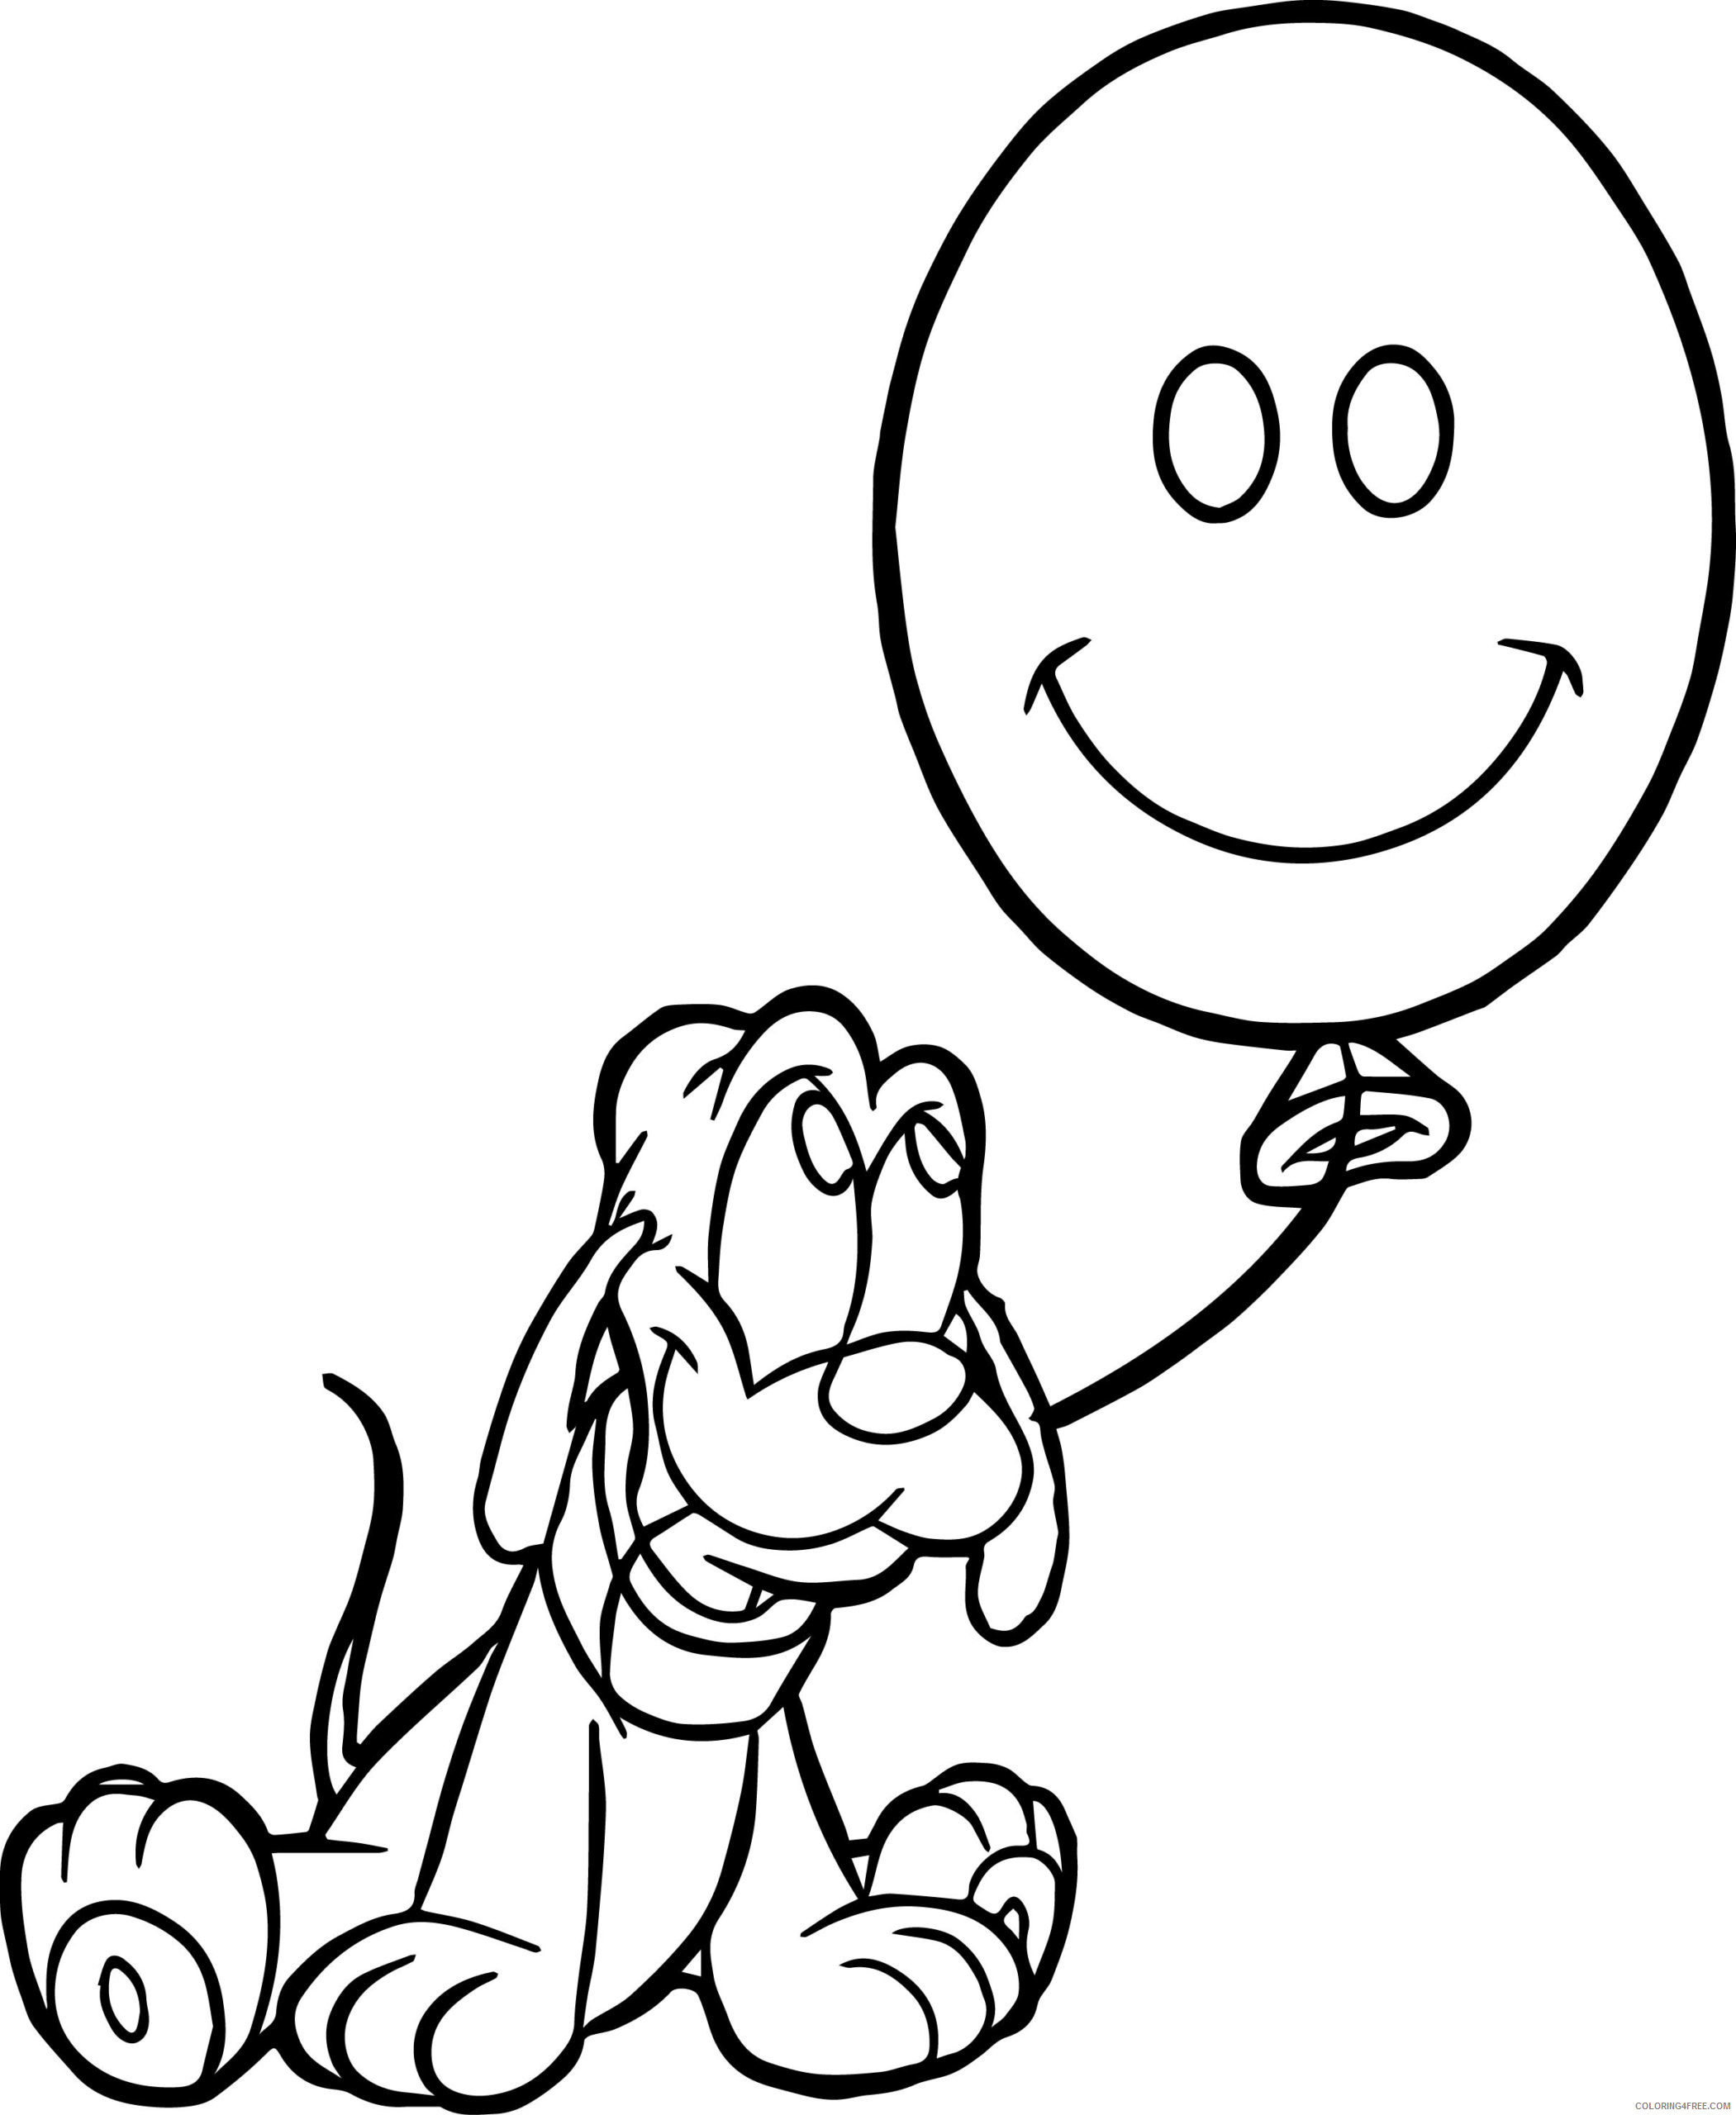 Pluto Coloring Pages Cartoons Pluto Balloon Printable 2020 4958 Coloring4free